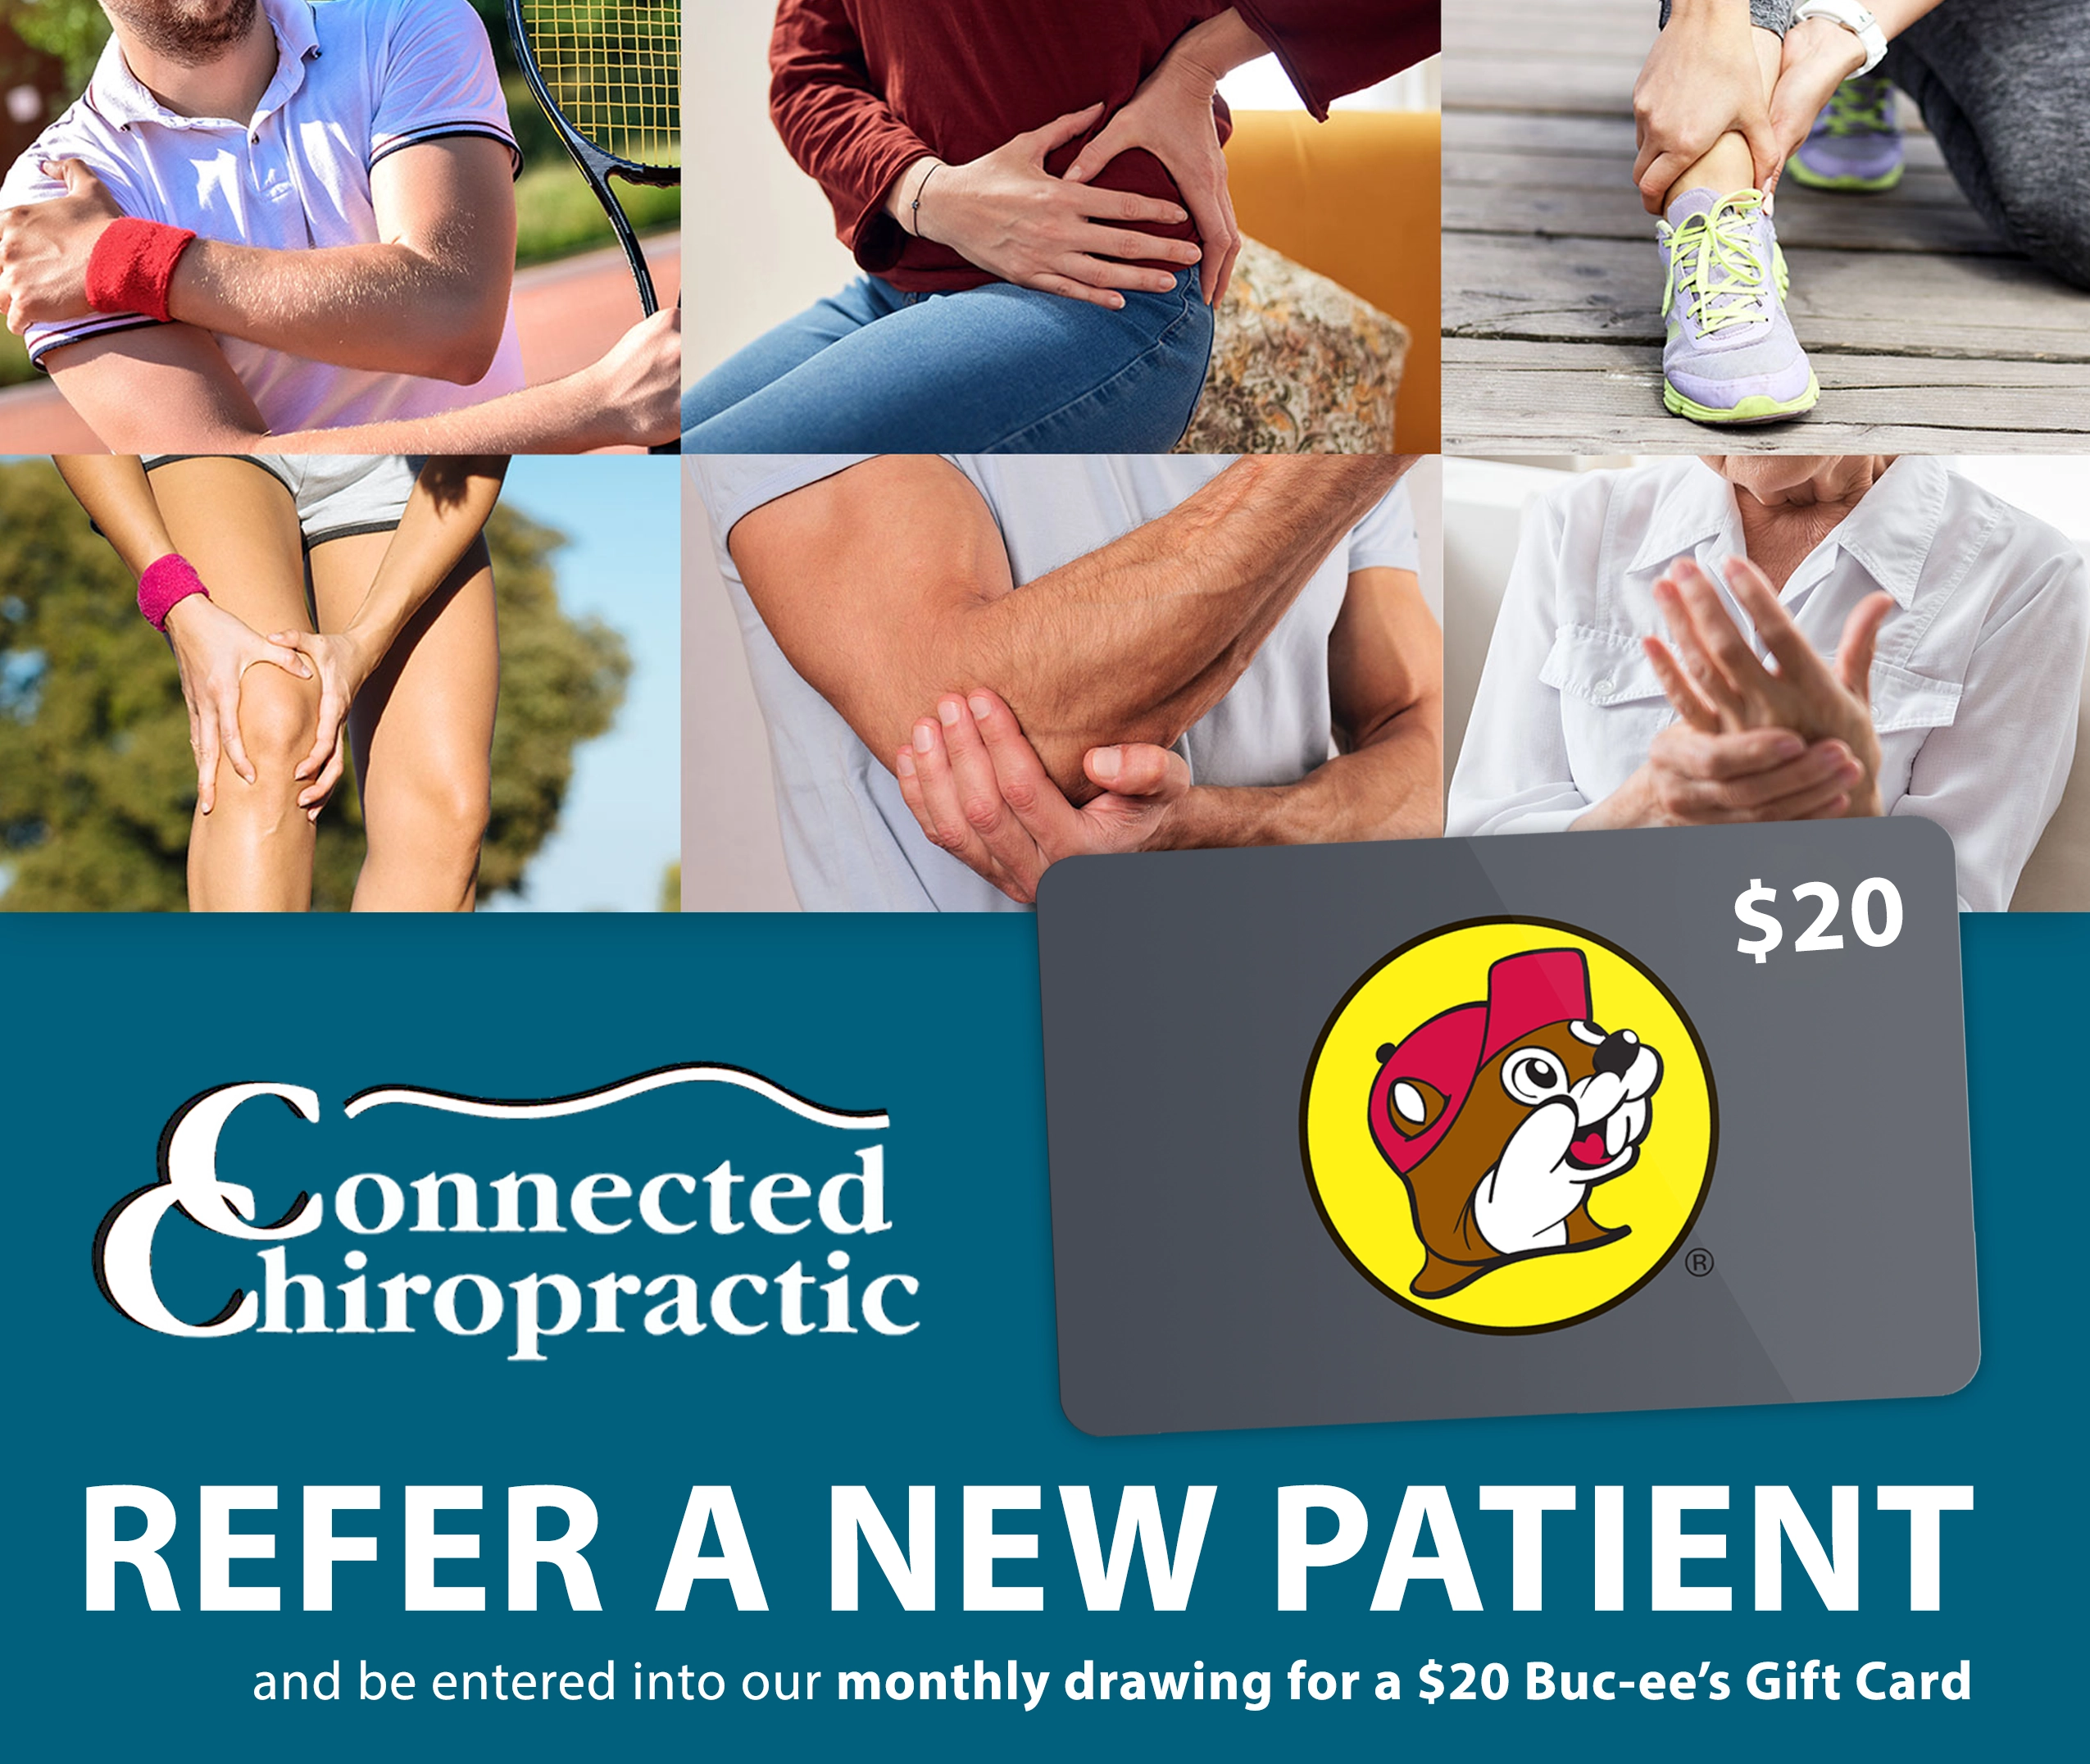 Connected Chiropratic New Patient Referrals - Chance to Win a $20 Buc-ee's Gift Card